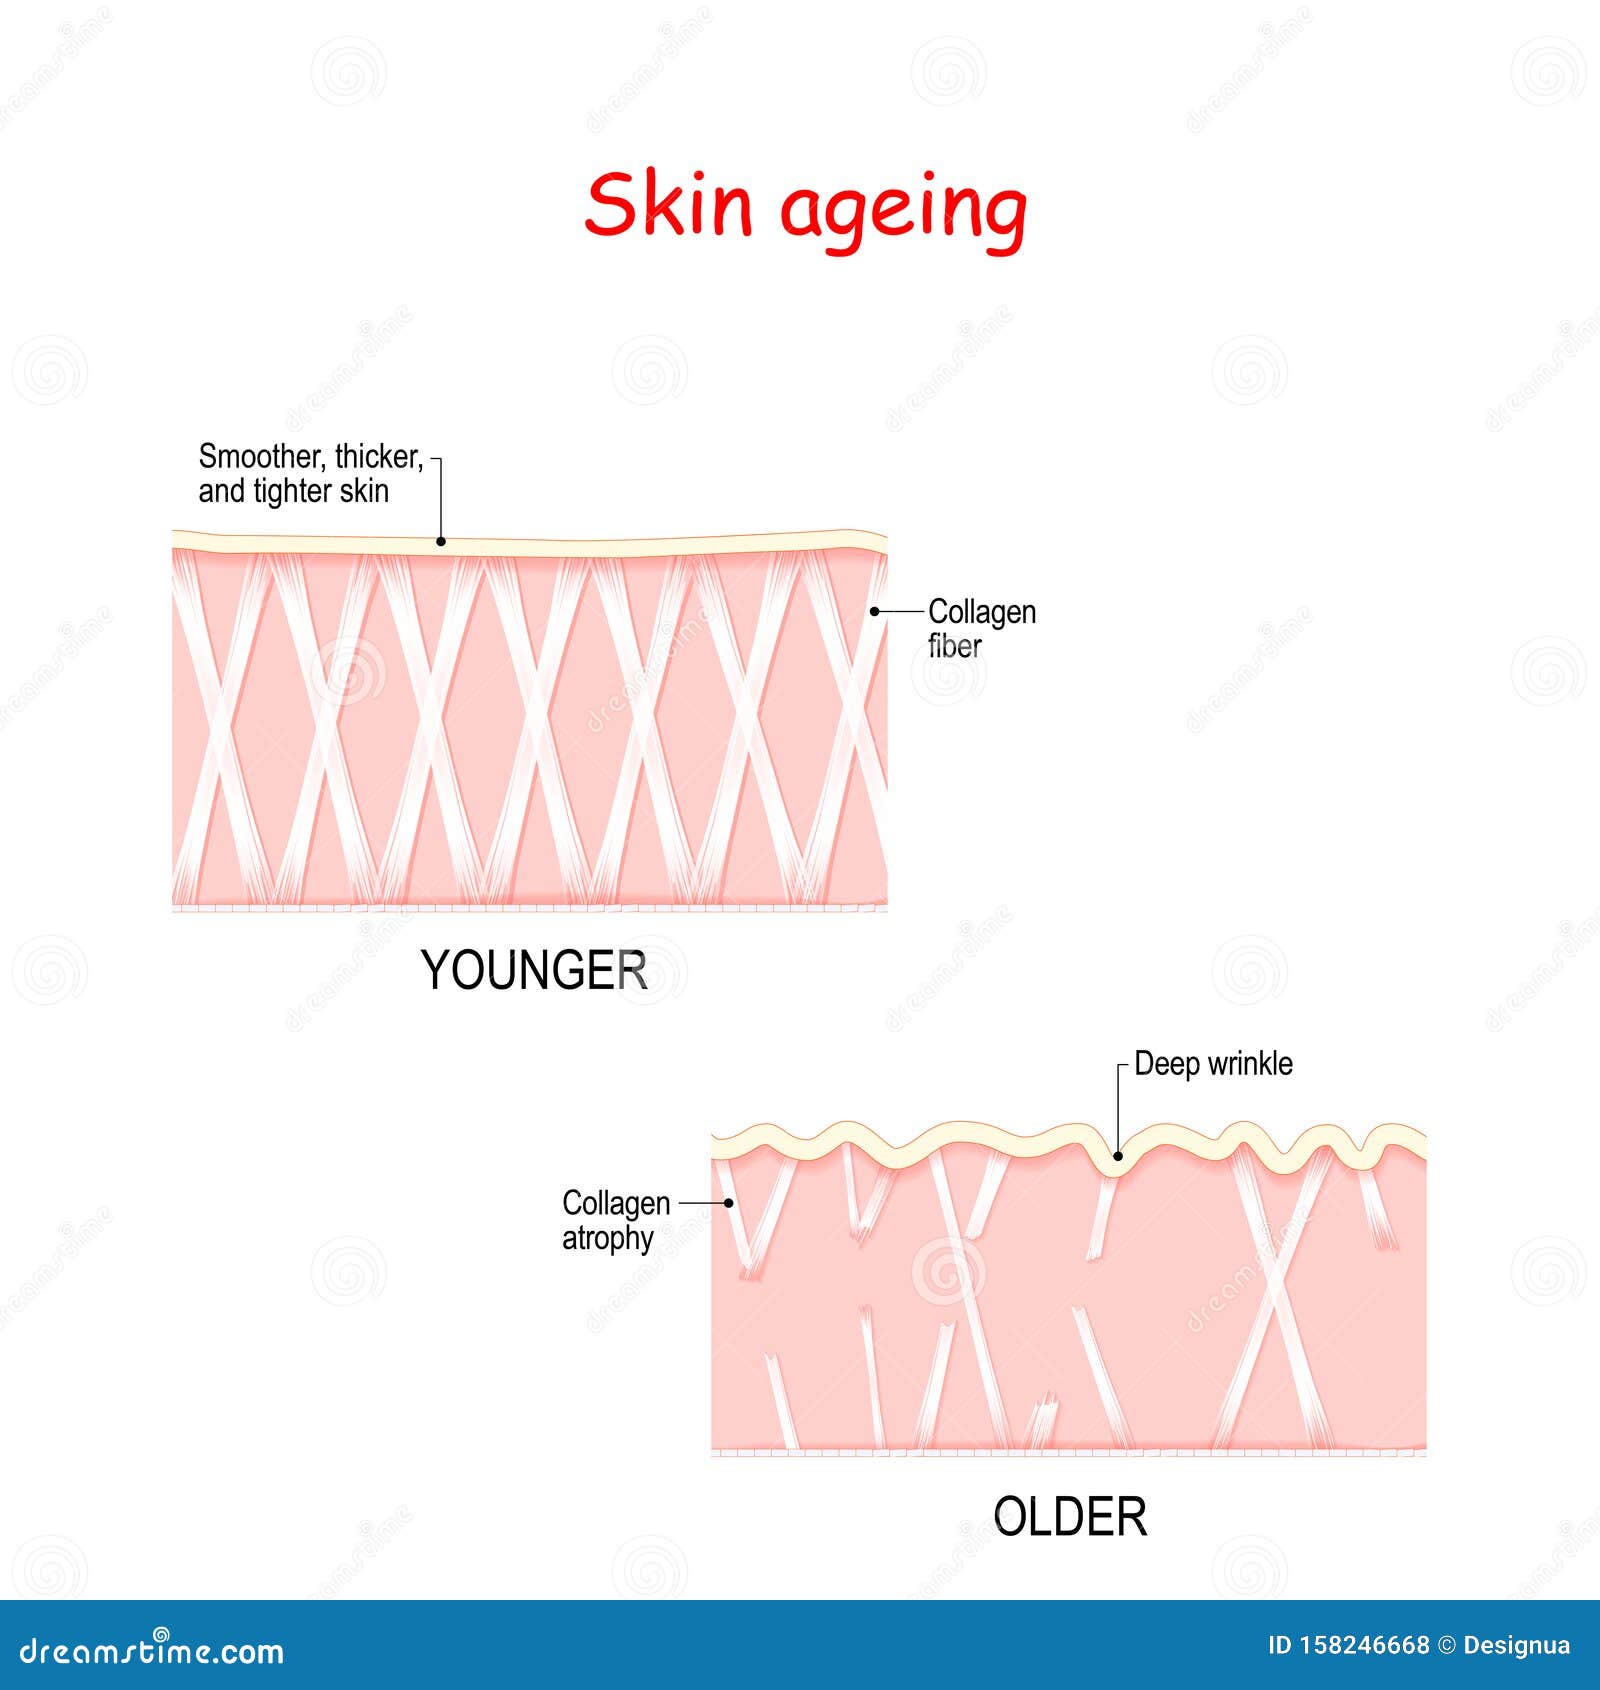 visual representation of skin changes over a lifetime